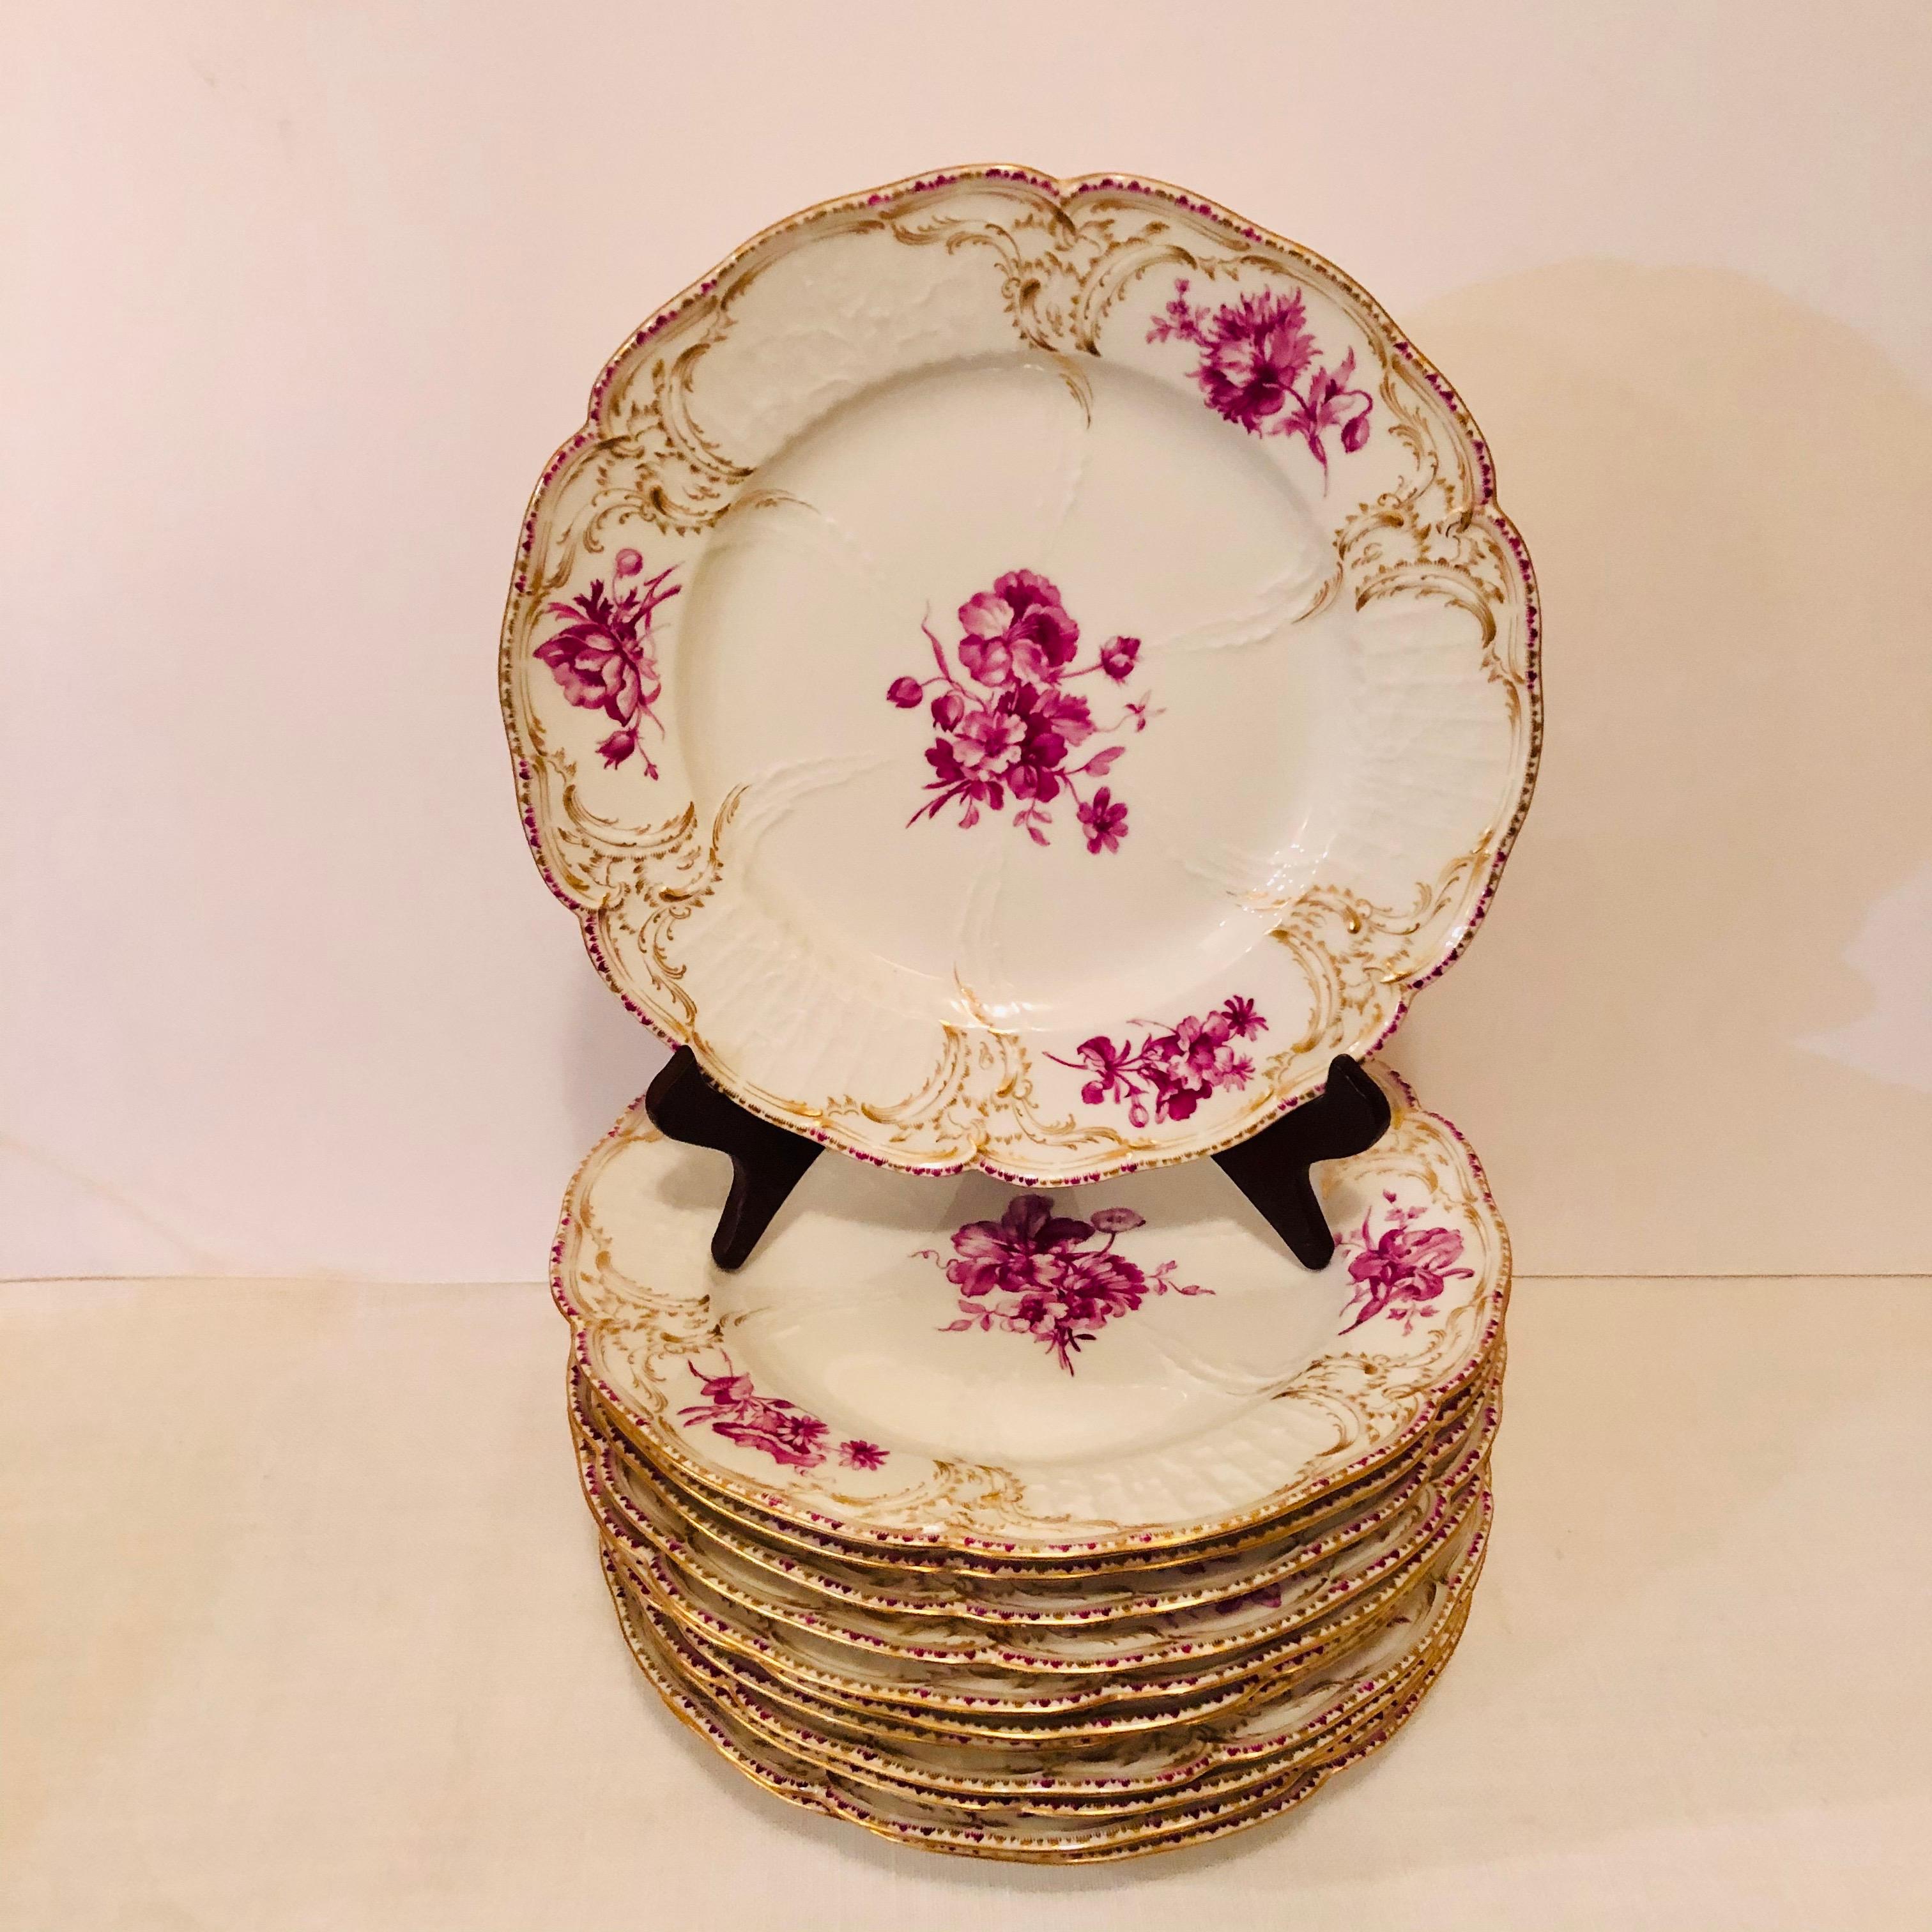 This is an amazing set of twelve KPM dinner plates, each hand-painted with a different puce colored flower bouquets. It has a central flower painting with three different bouquet medallions painted outside the central flower bouquet. You can see the